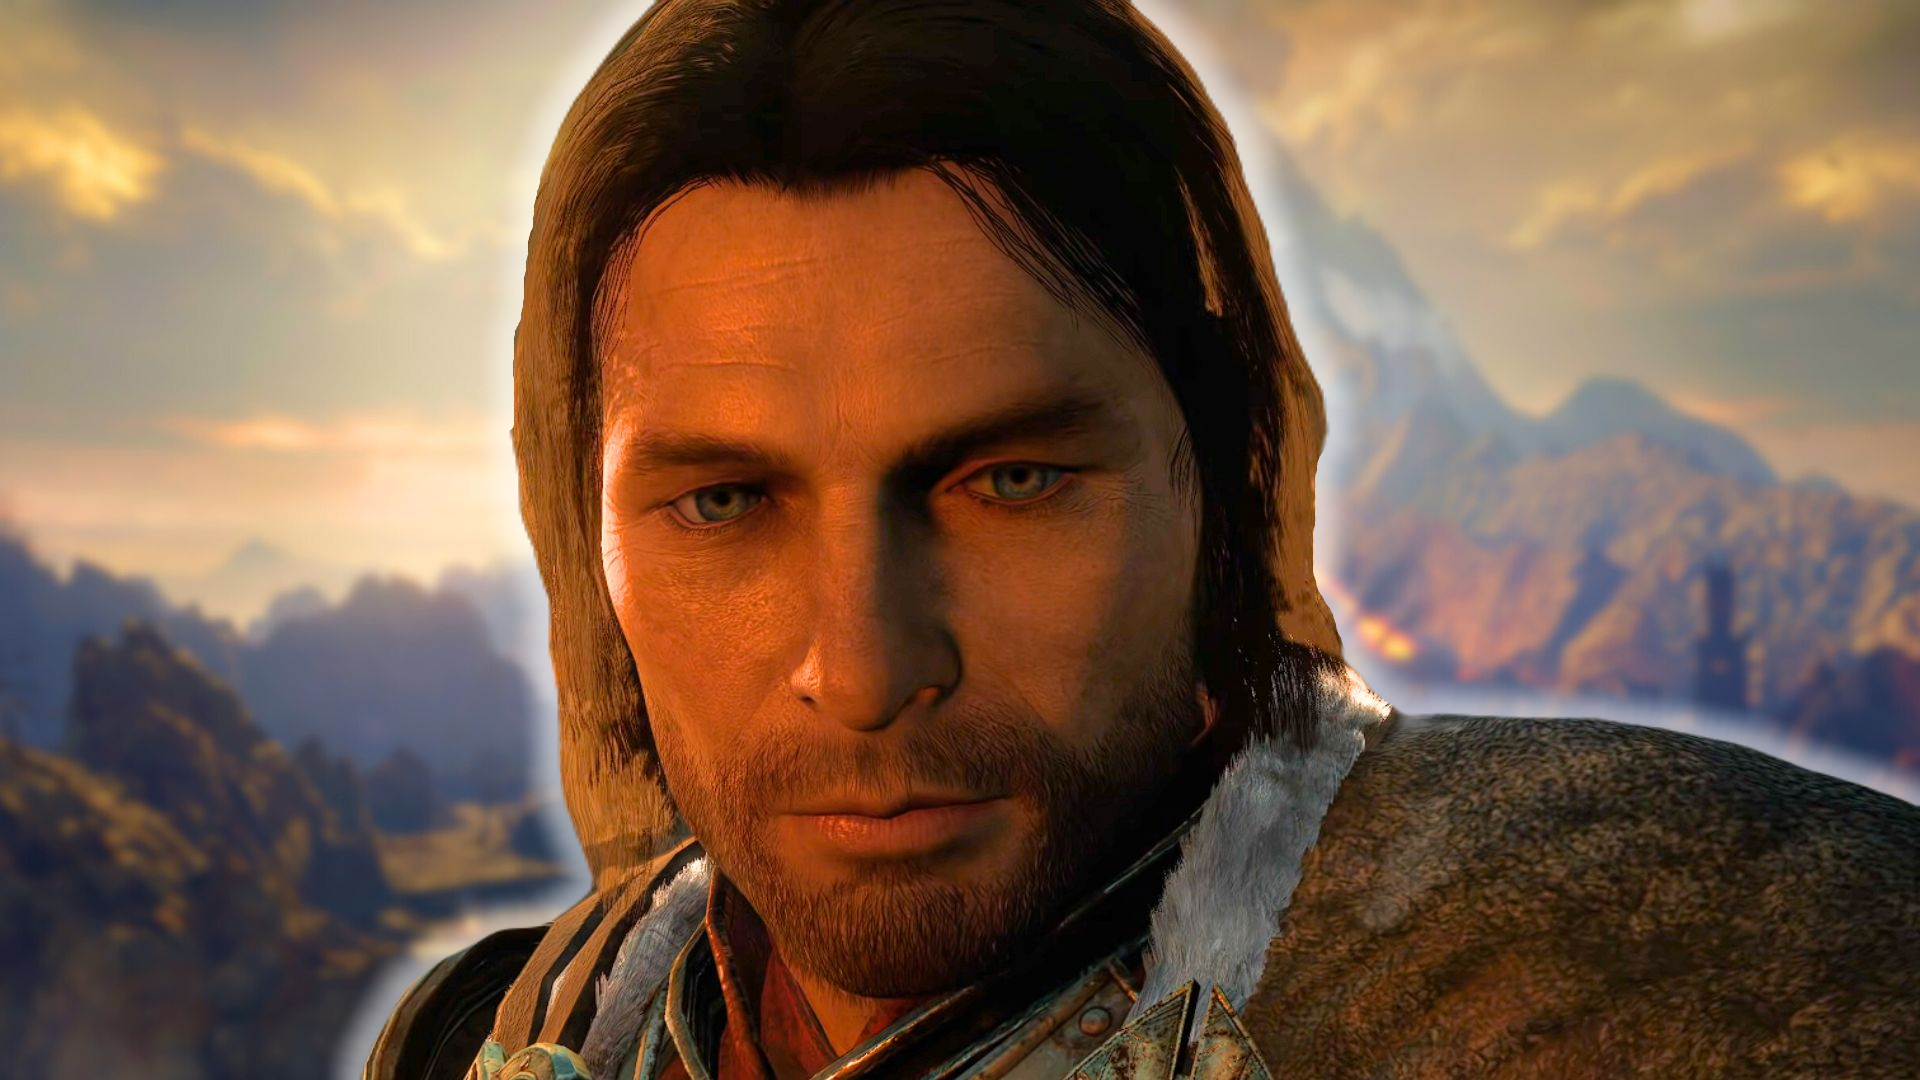 Brilliant, unique open world game Shadow of War is now just $3